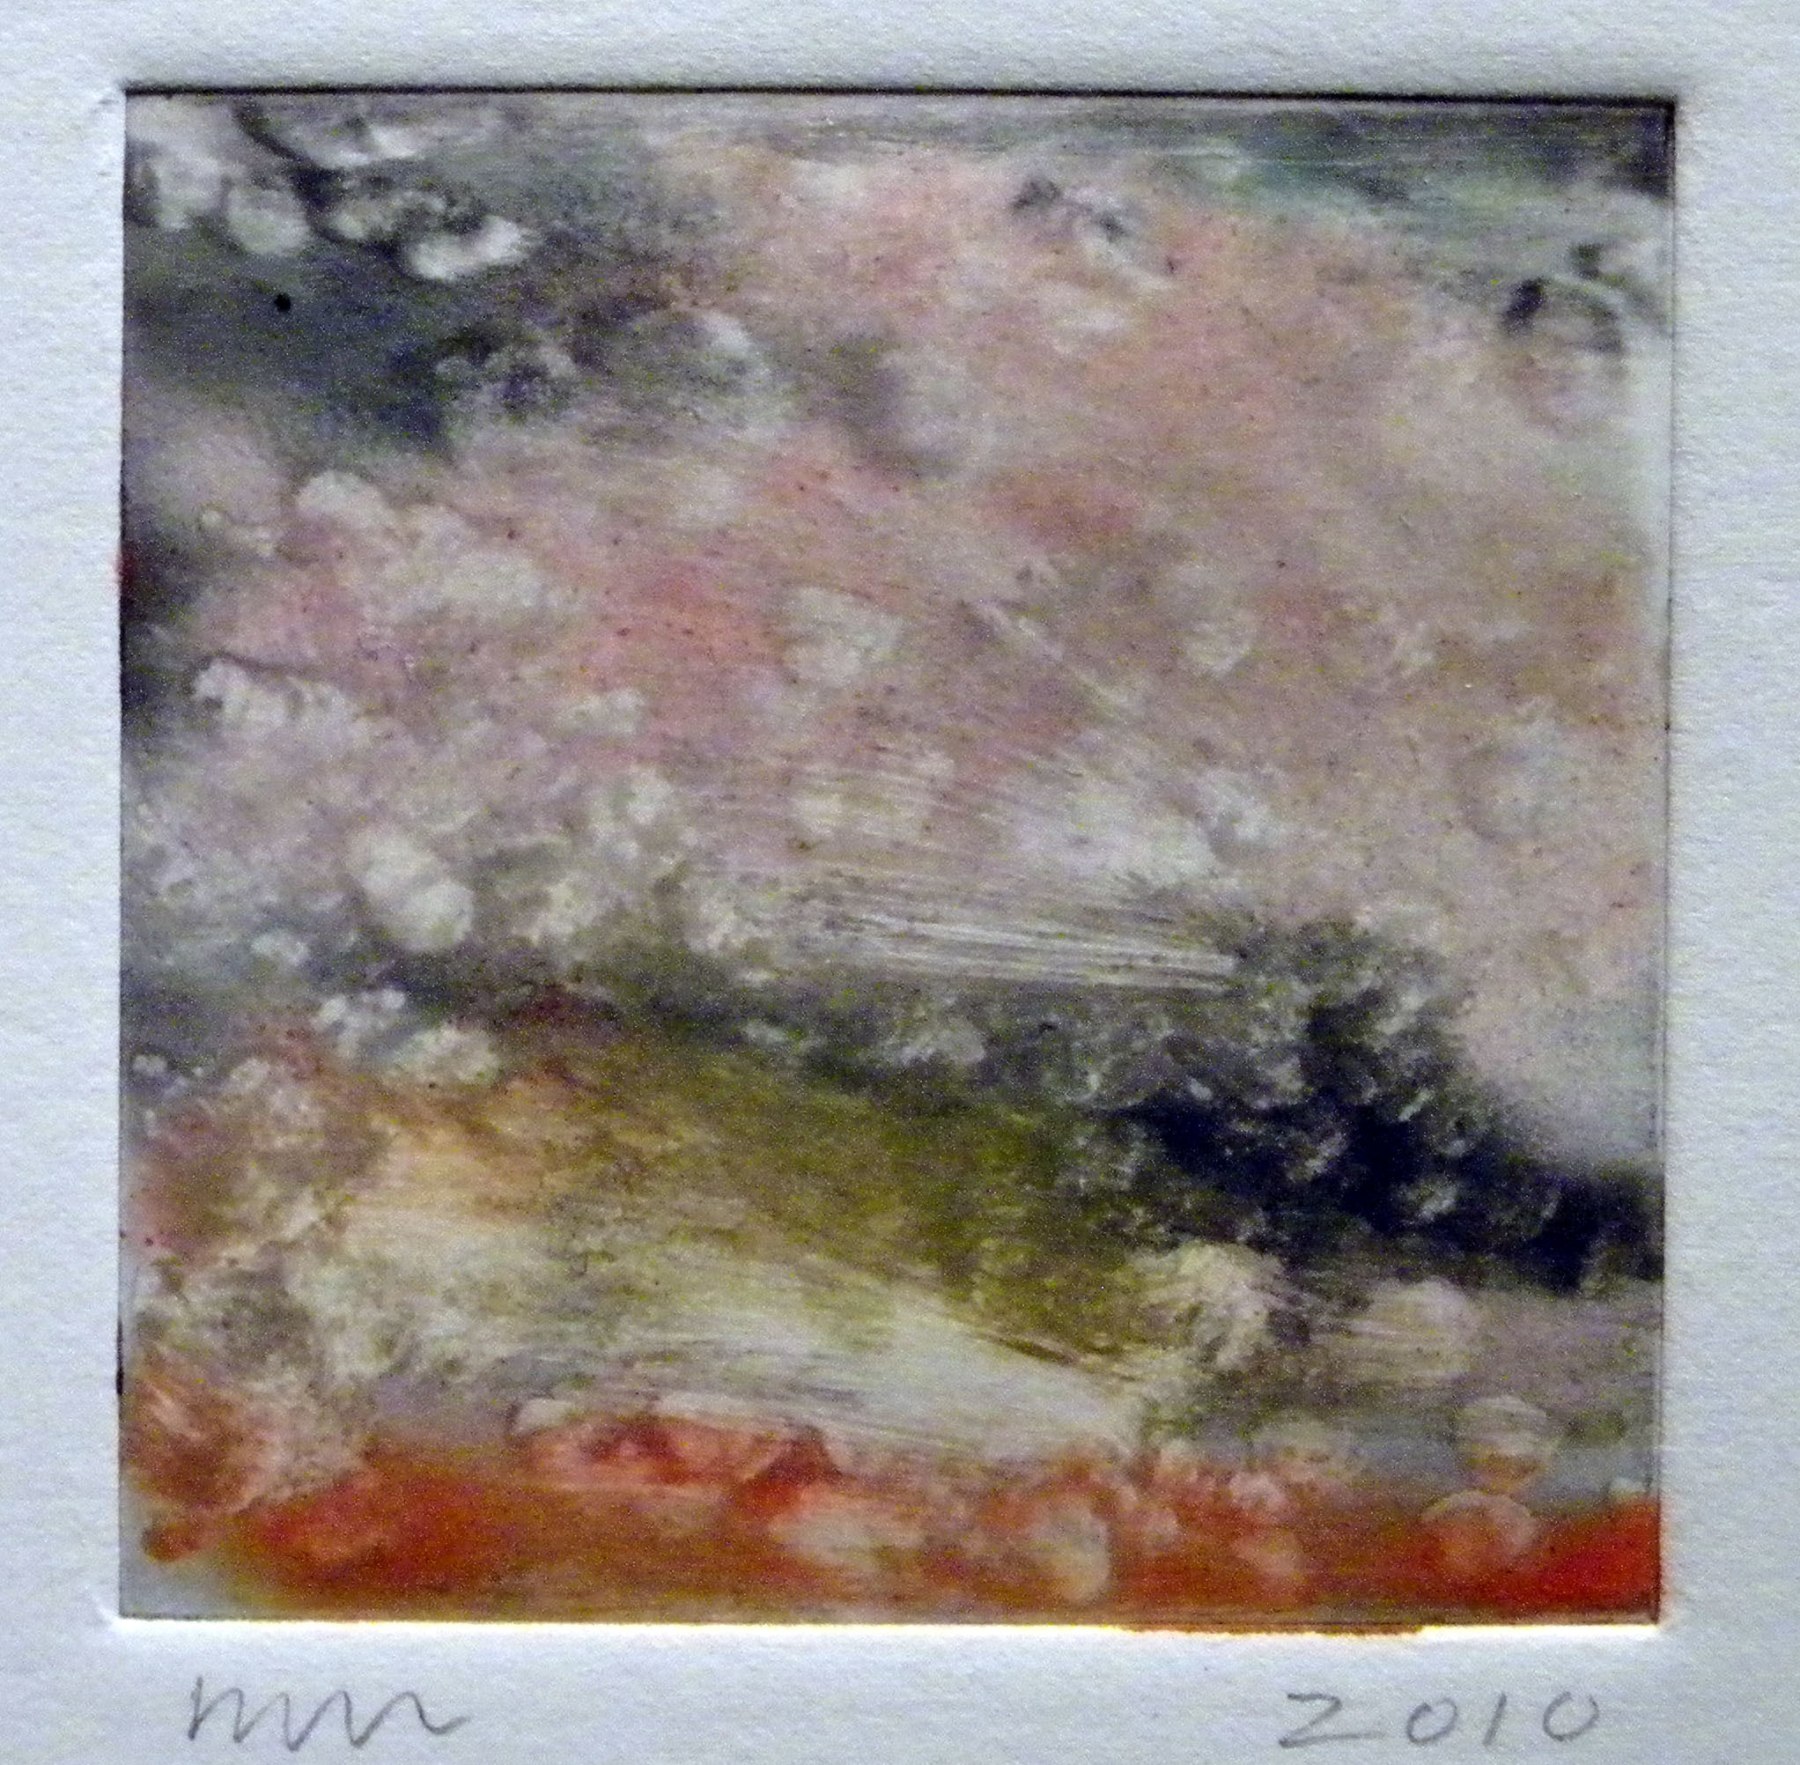 Wendy Mark  Red Yellow, Clouds, 2009  Monotype Plate 3 1/4 x 3 1/4 inches (8.3 x 8.3 cm)